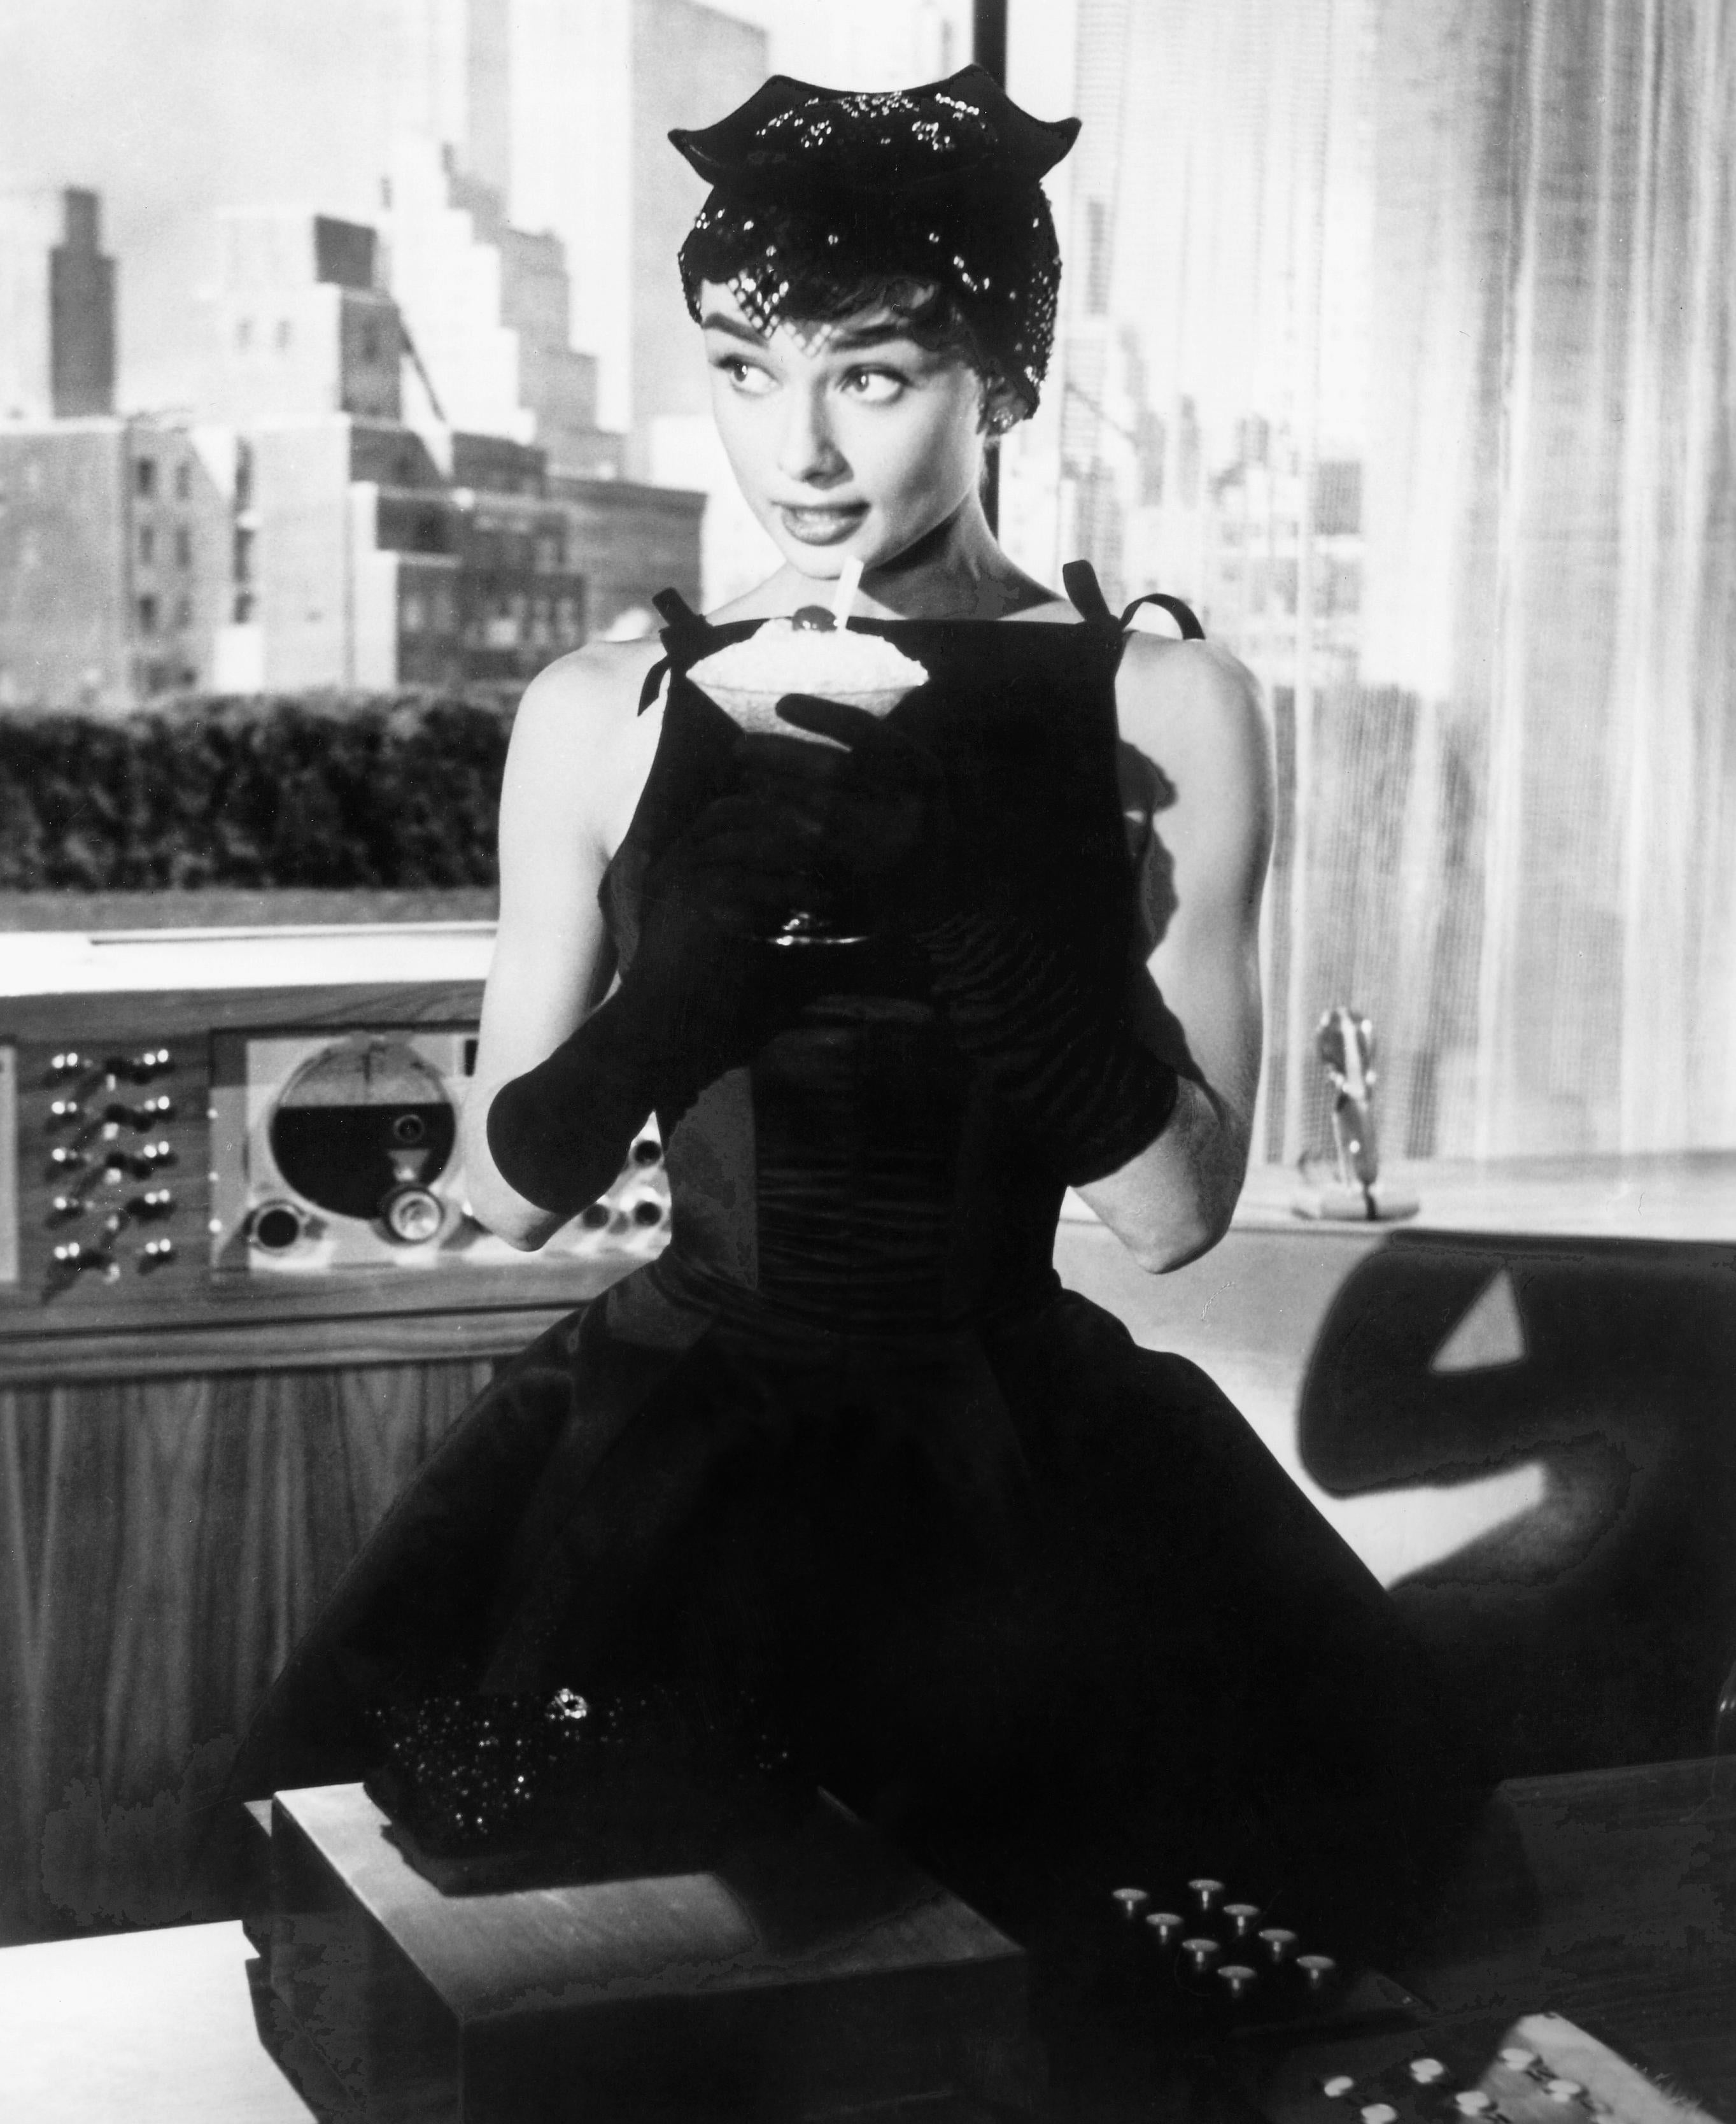 Unknown Black and White Photograph - Audrey Hepburn with Drink in "Sabrina" Globe Photos Fine Art Print